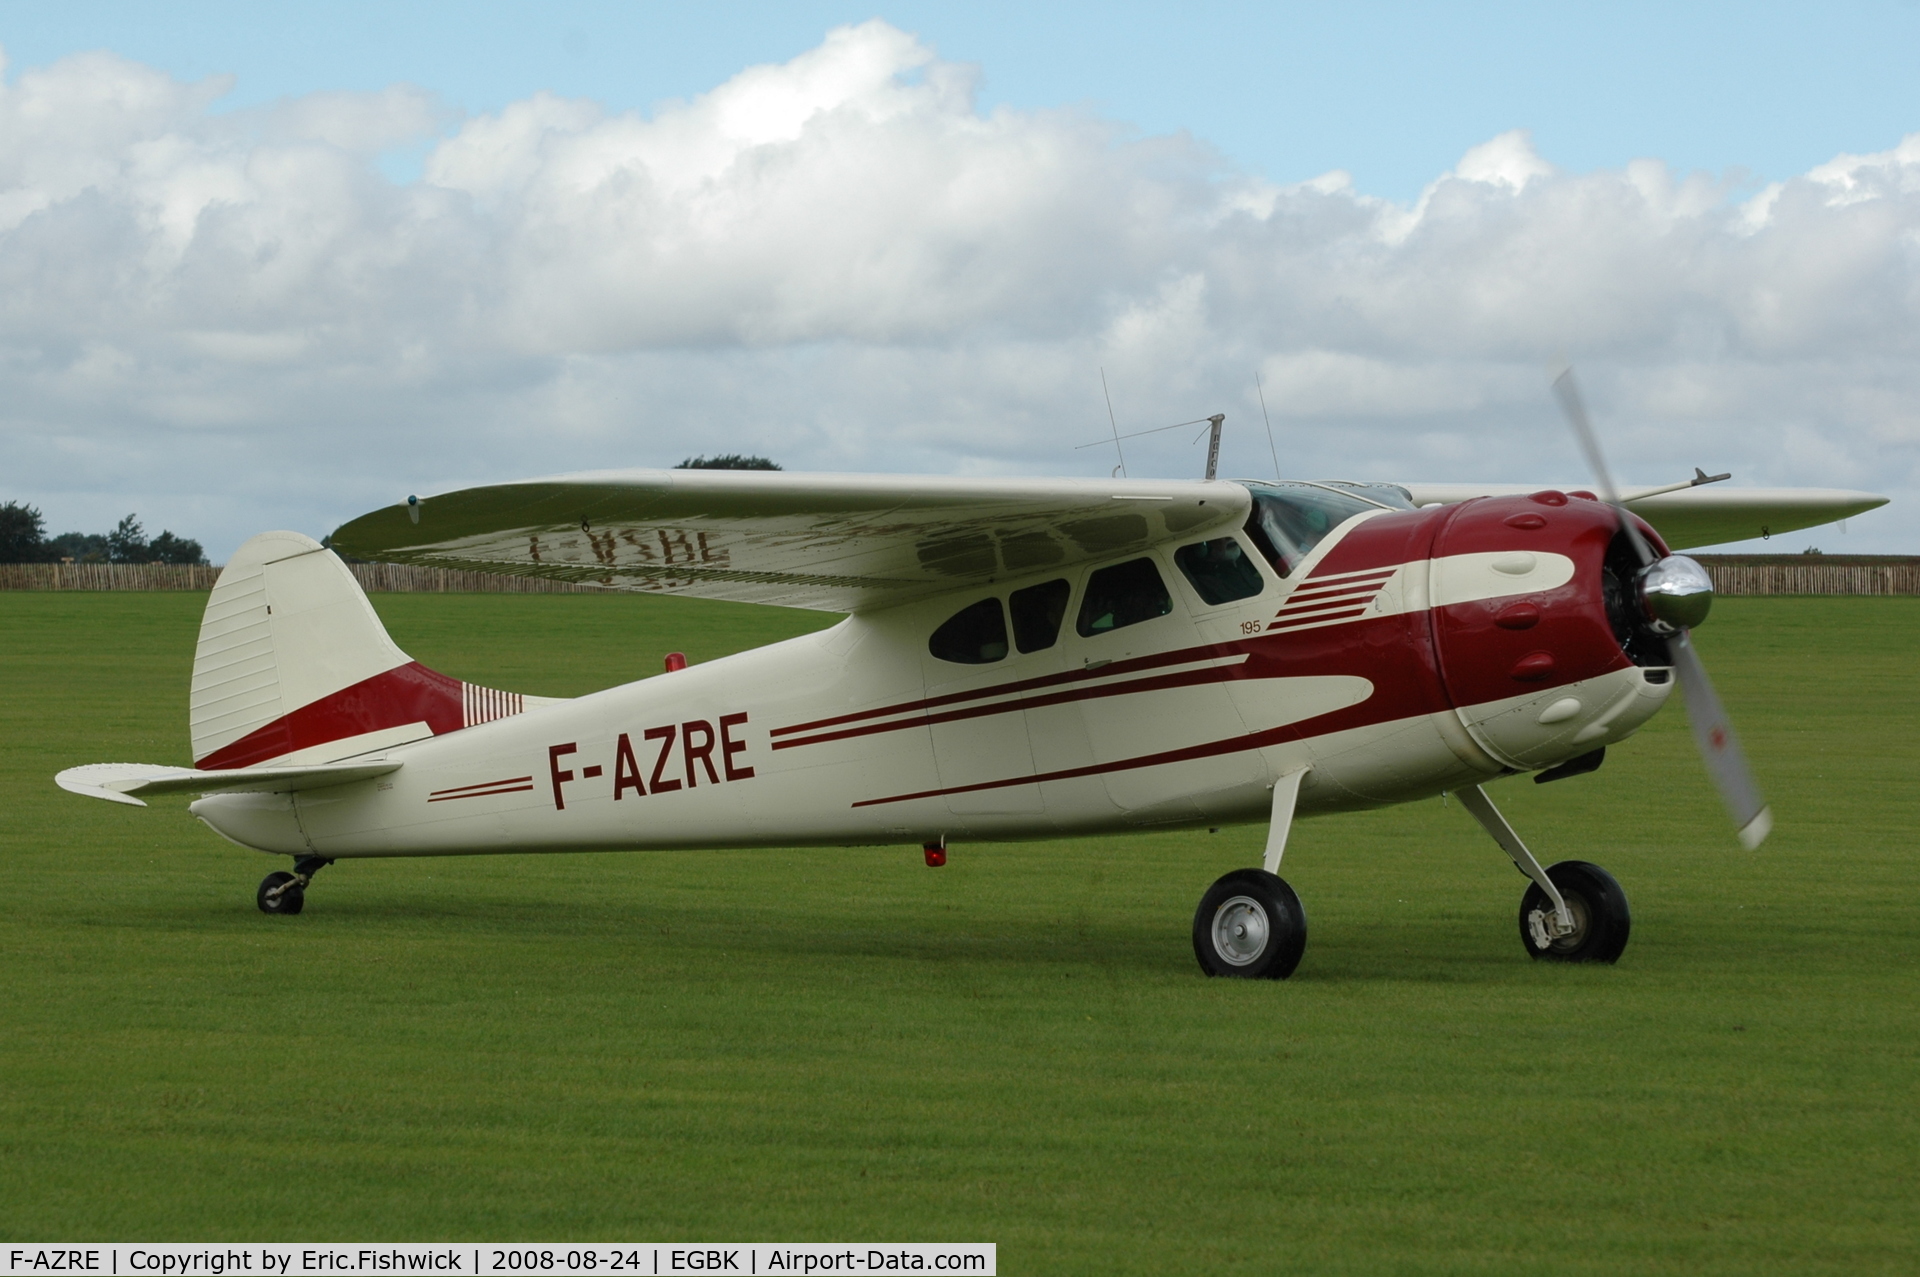 F-AZRE, 1952 Cessna 190B C/N 16046, 3. F-AZRE Cessna 195B at Sywell Airshow 24 Aug 2008